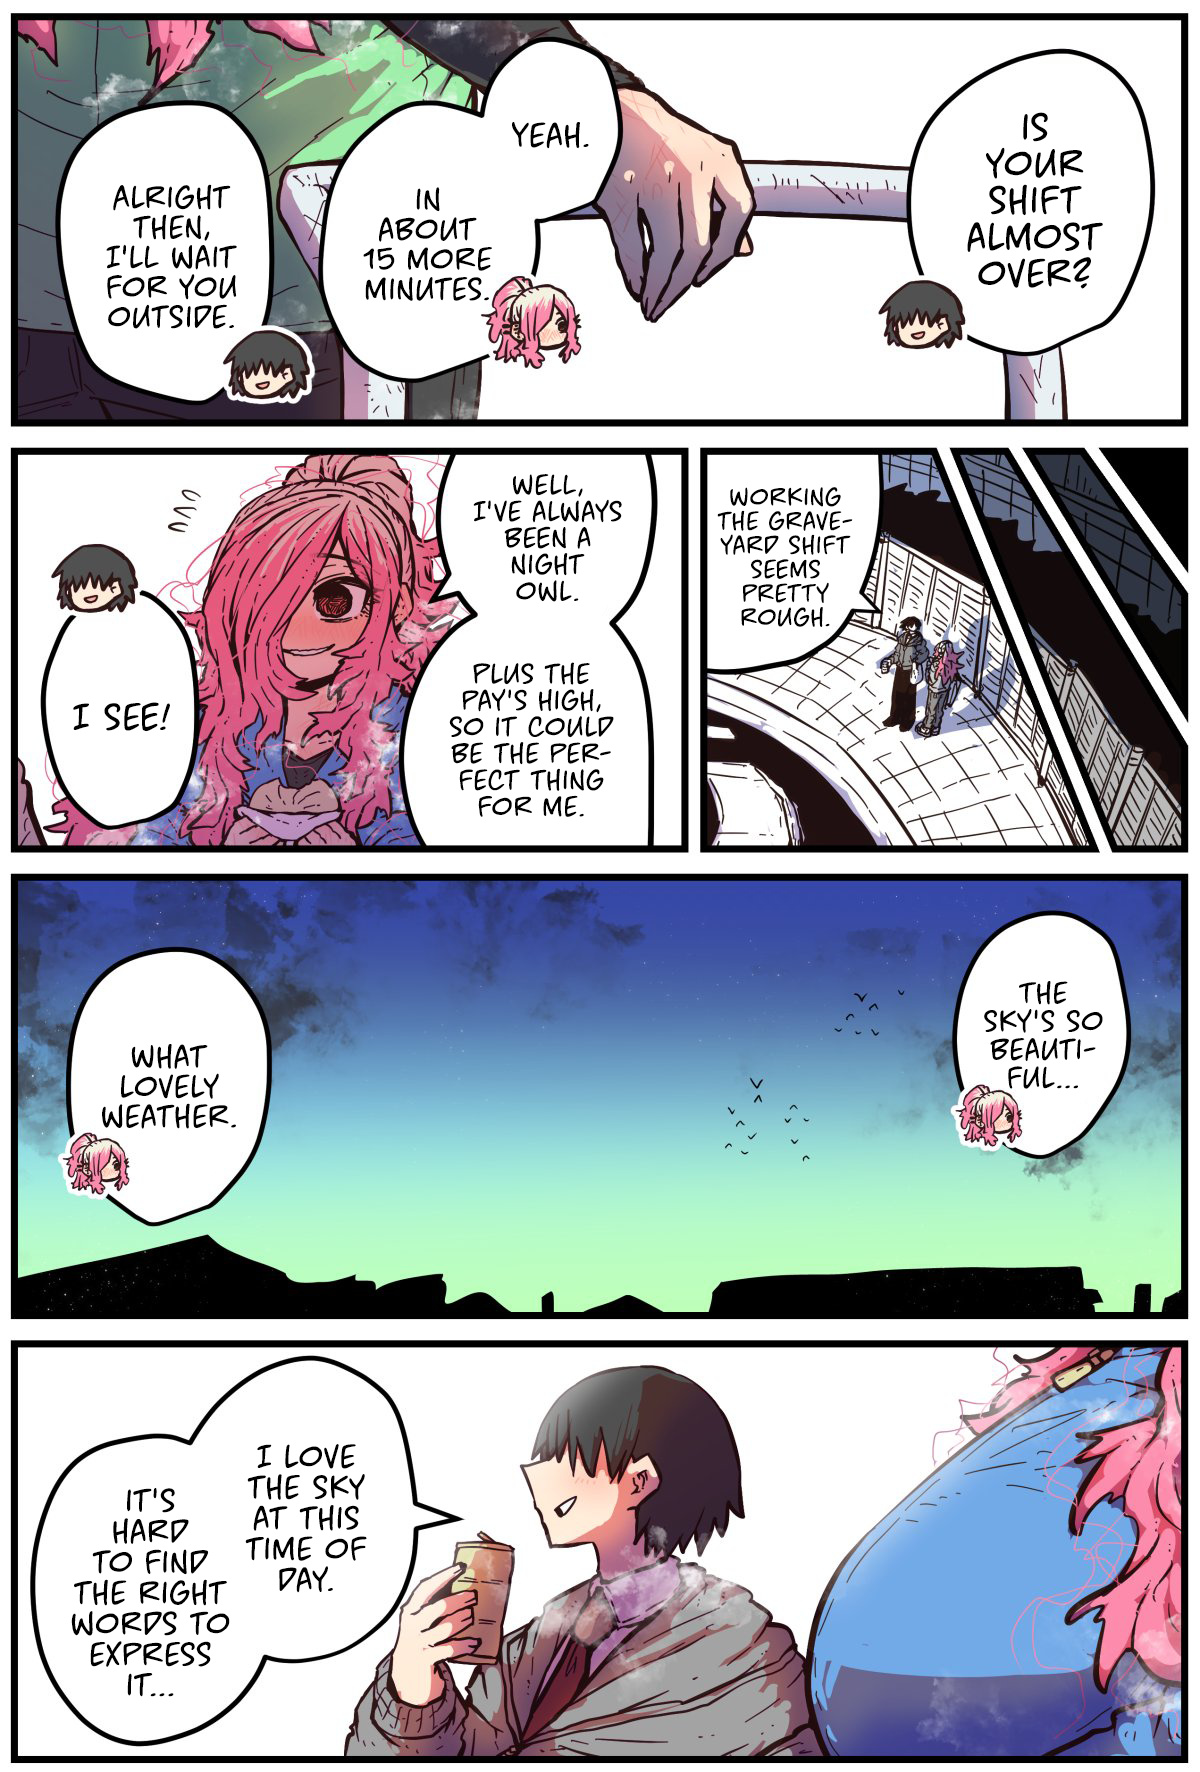 When I Returned To My Hometown, My Childhood Friend Was Broken - Page 3